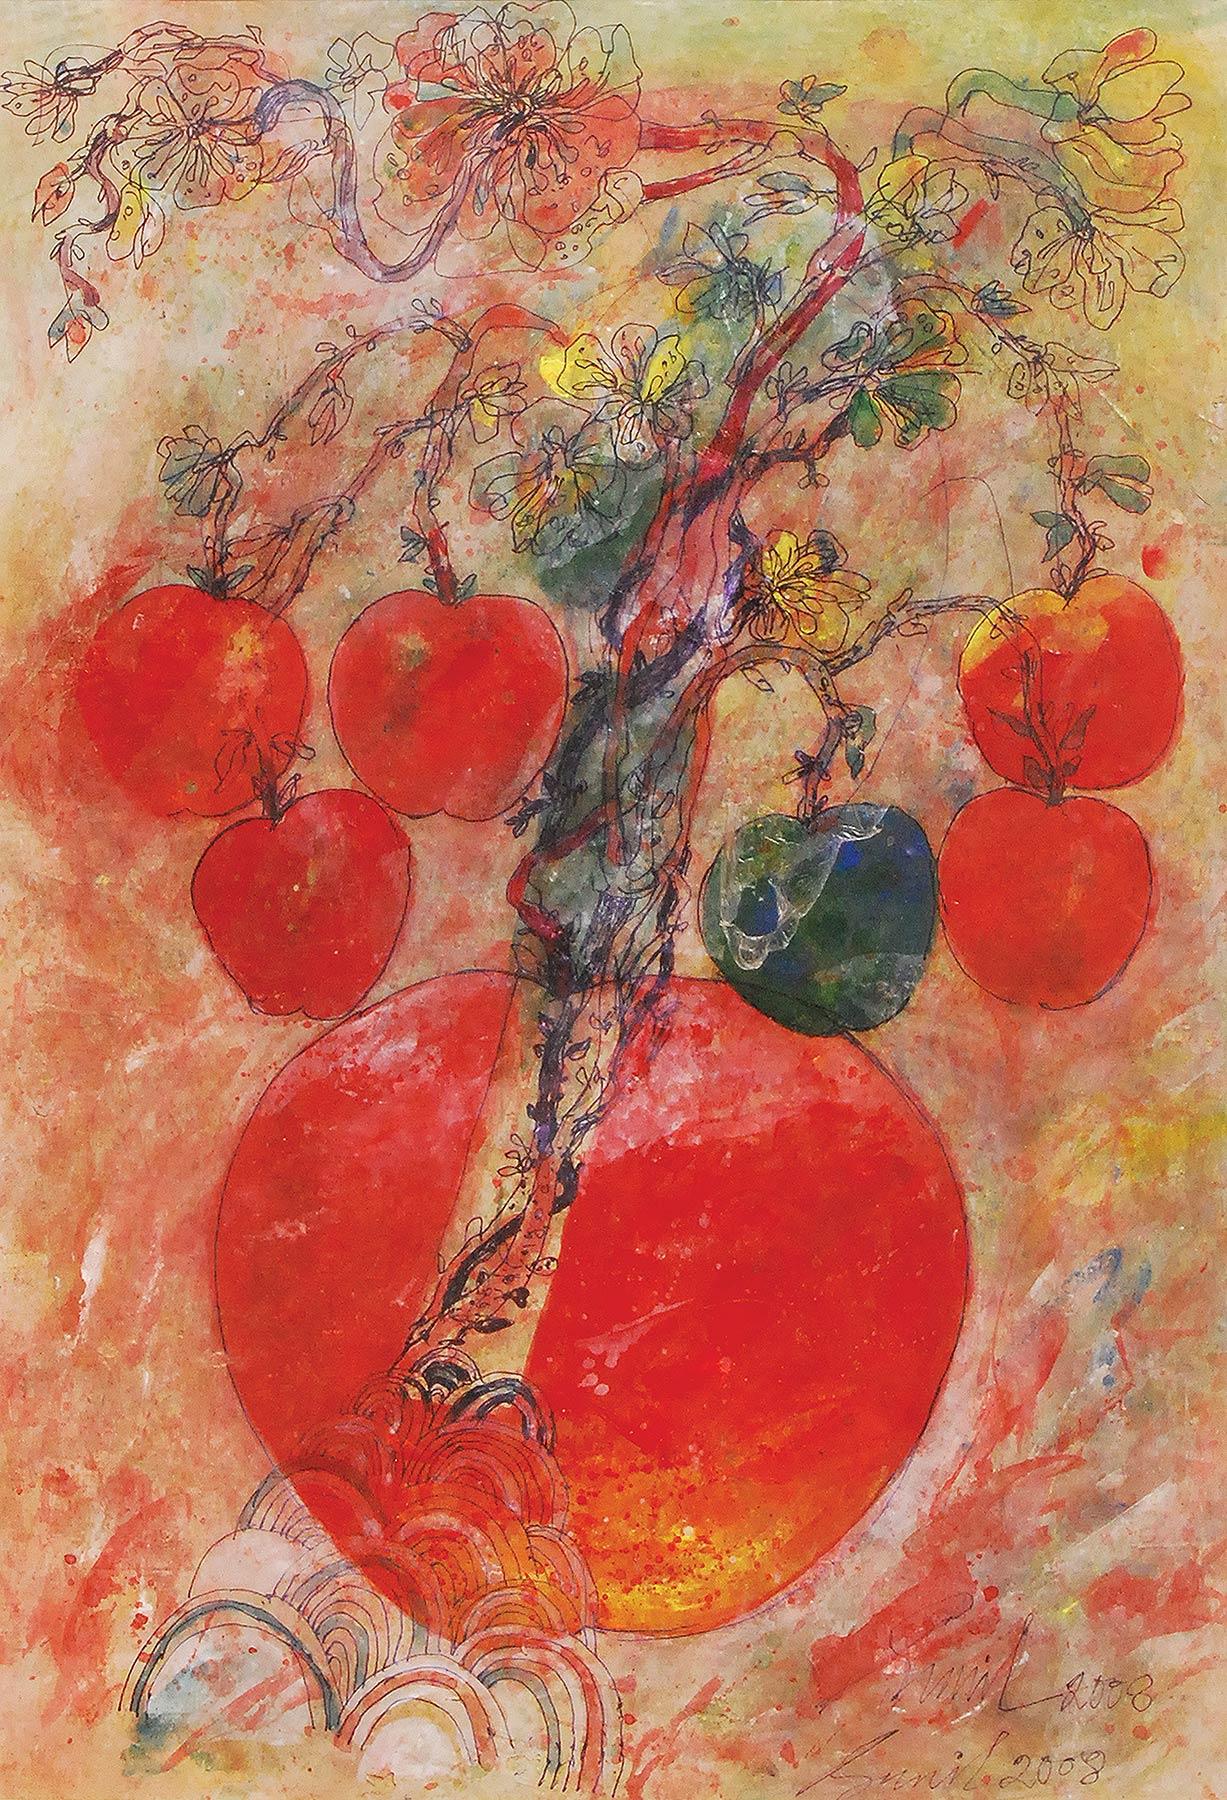 Sunil Das Interior Painting - Apples, Mixed Media on Paper, Red, Green, Blue, Yellow by Indian Artist"In Stock"